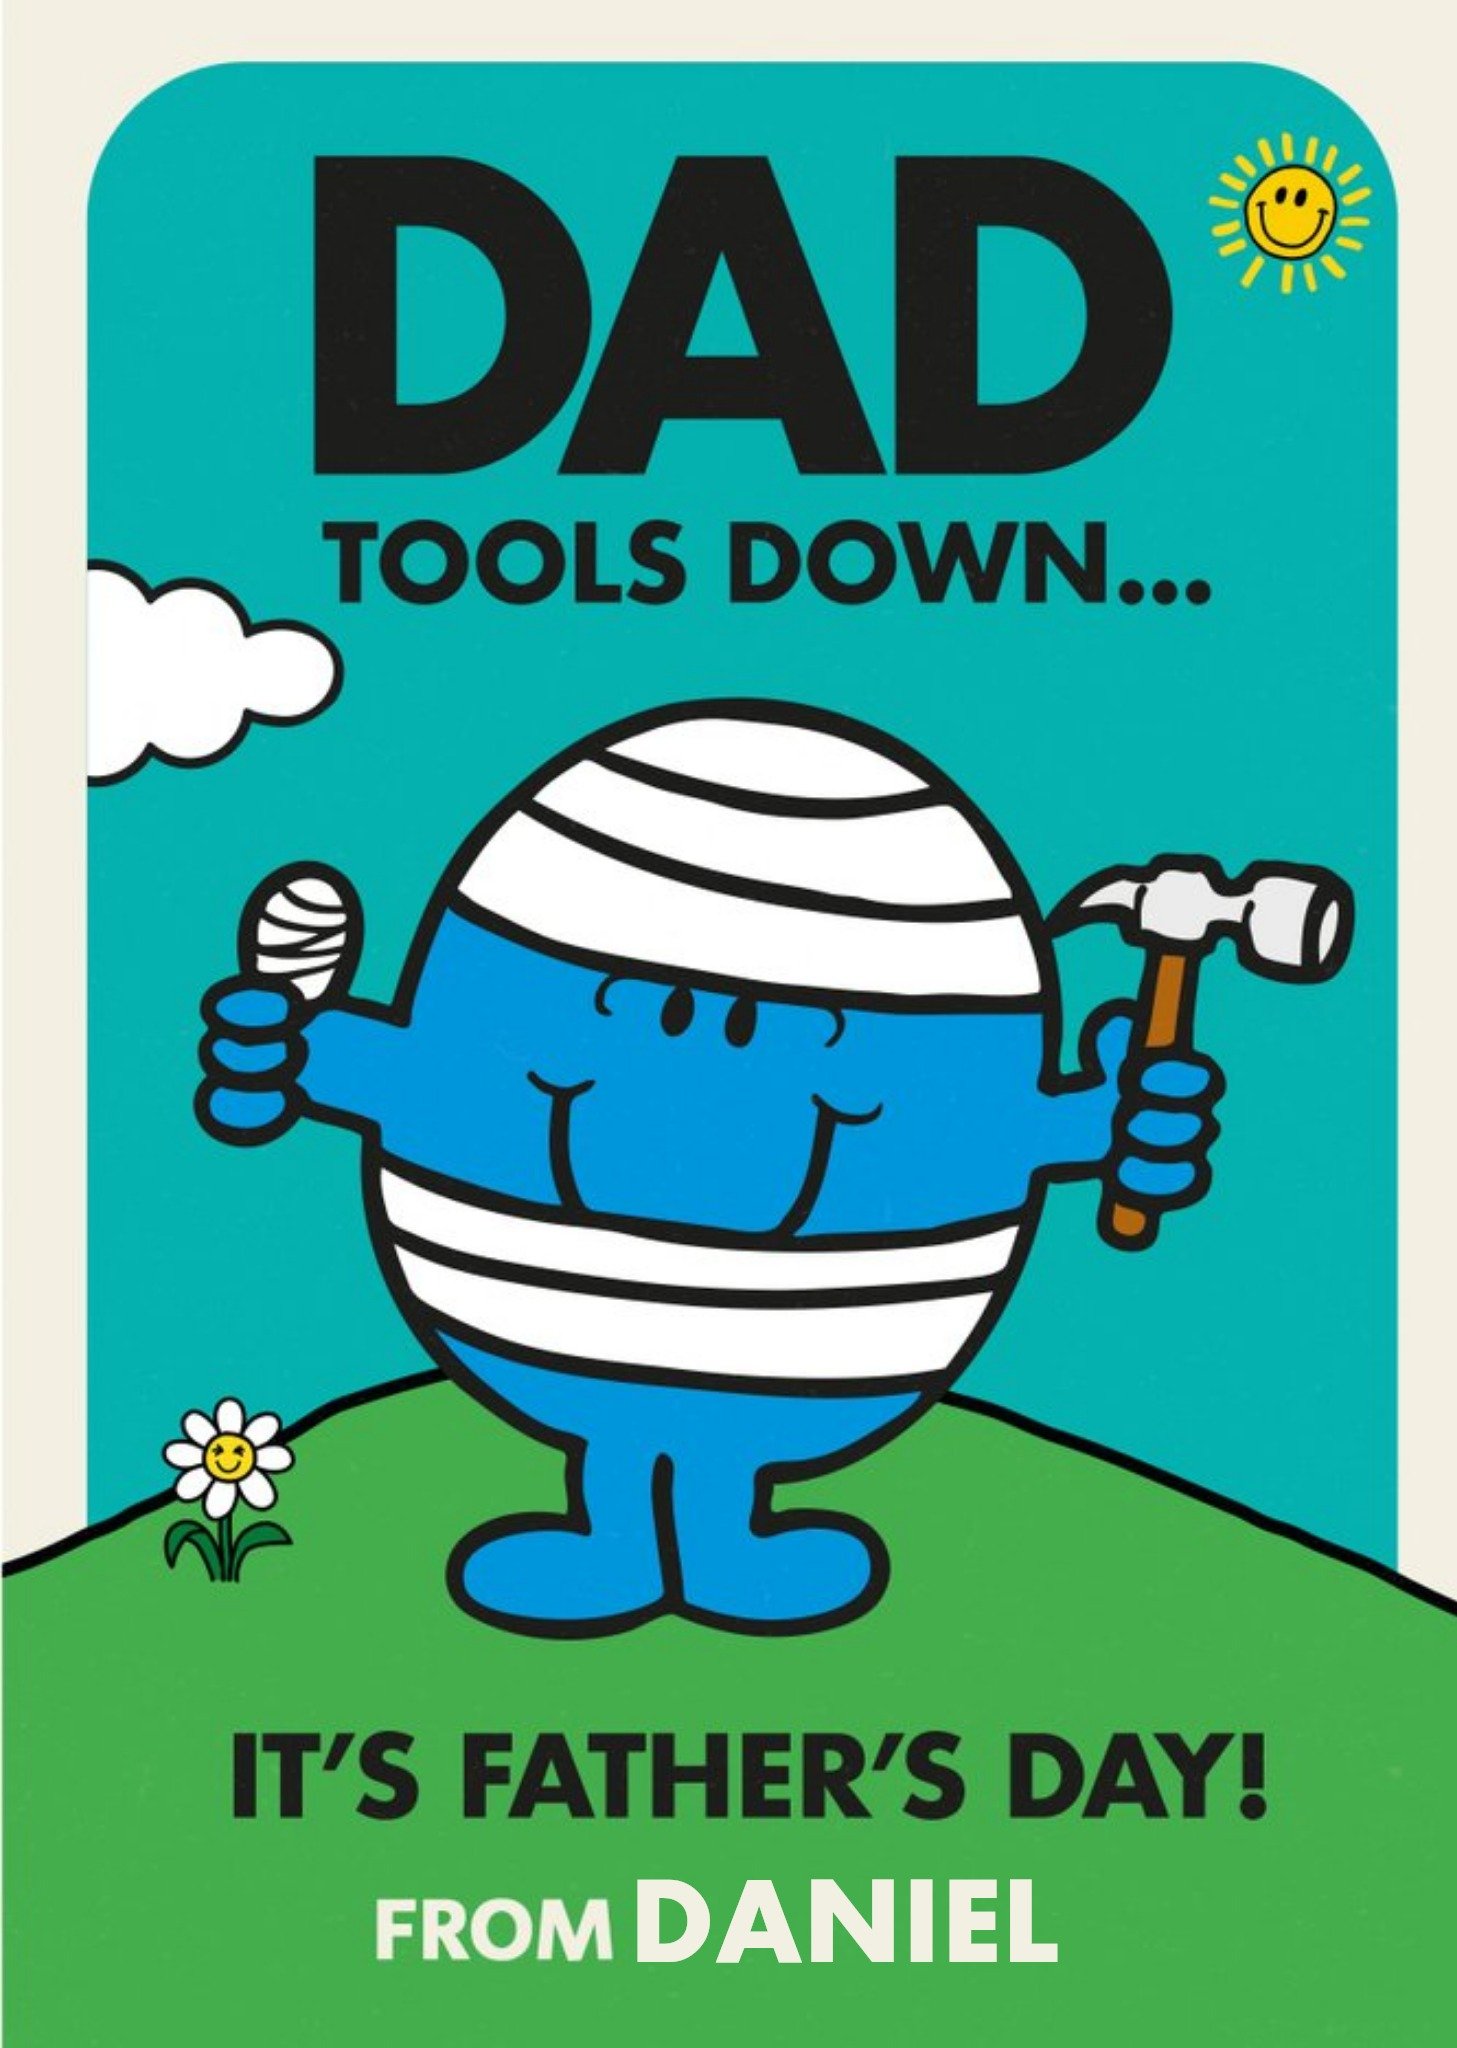 Other Dad Tools Down Card Ecard